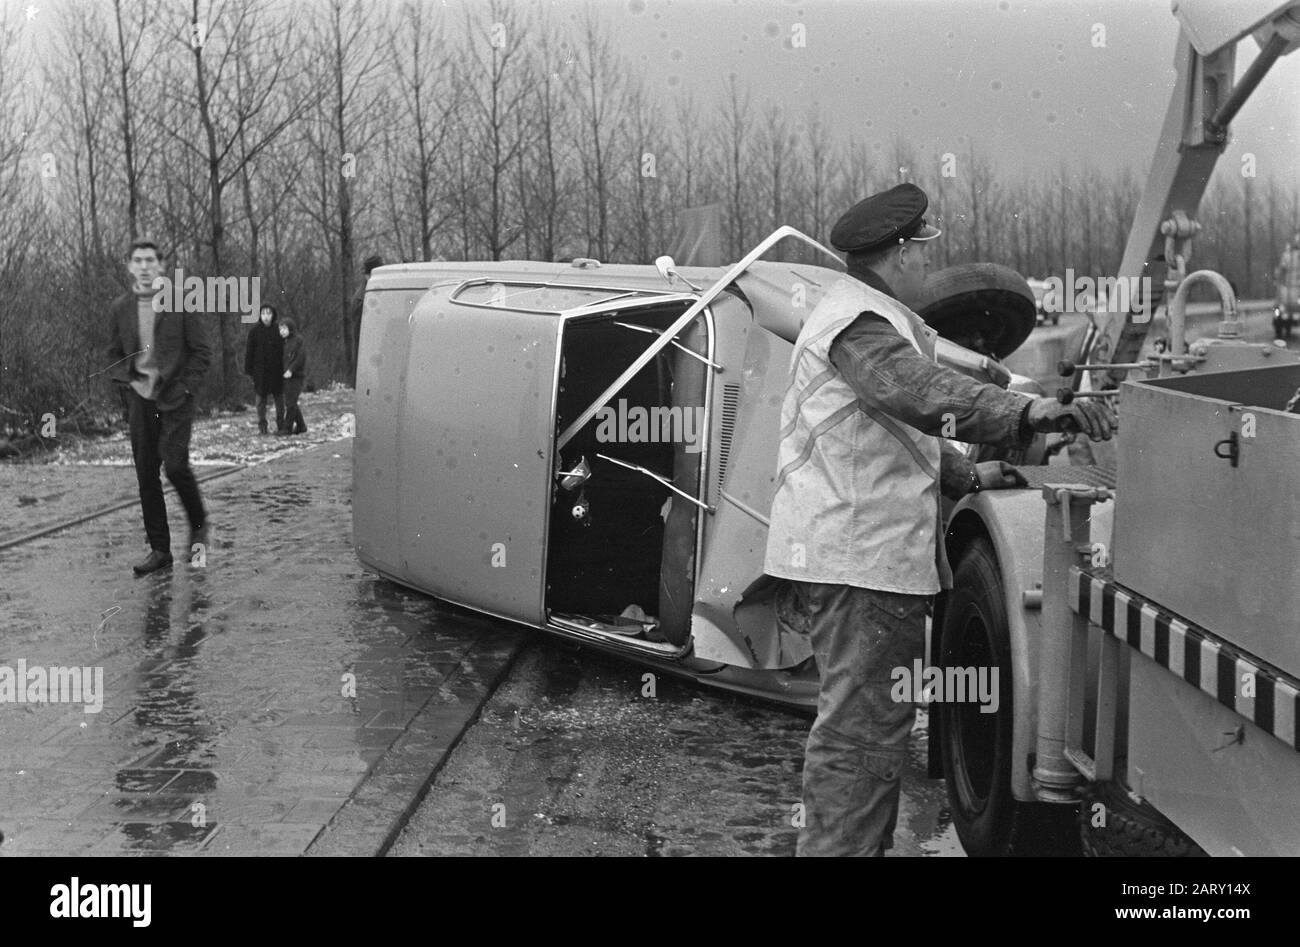 Two cars collide at Gooiseweg, the other slipped car Date: March 31, 1967 Keywords: cars, accidents Stock Photo